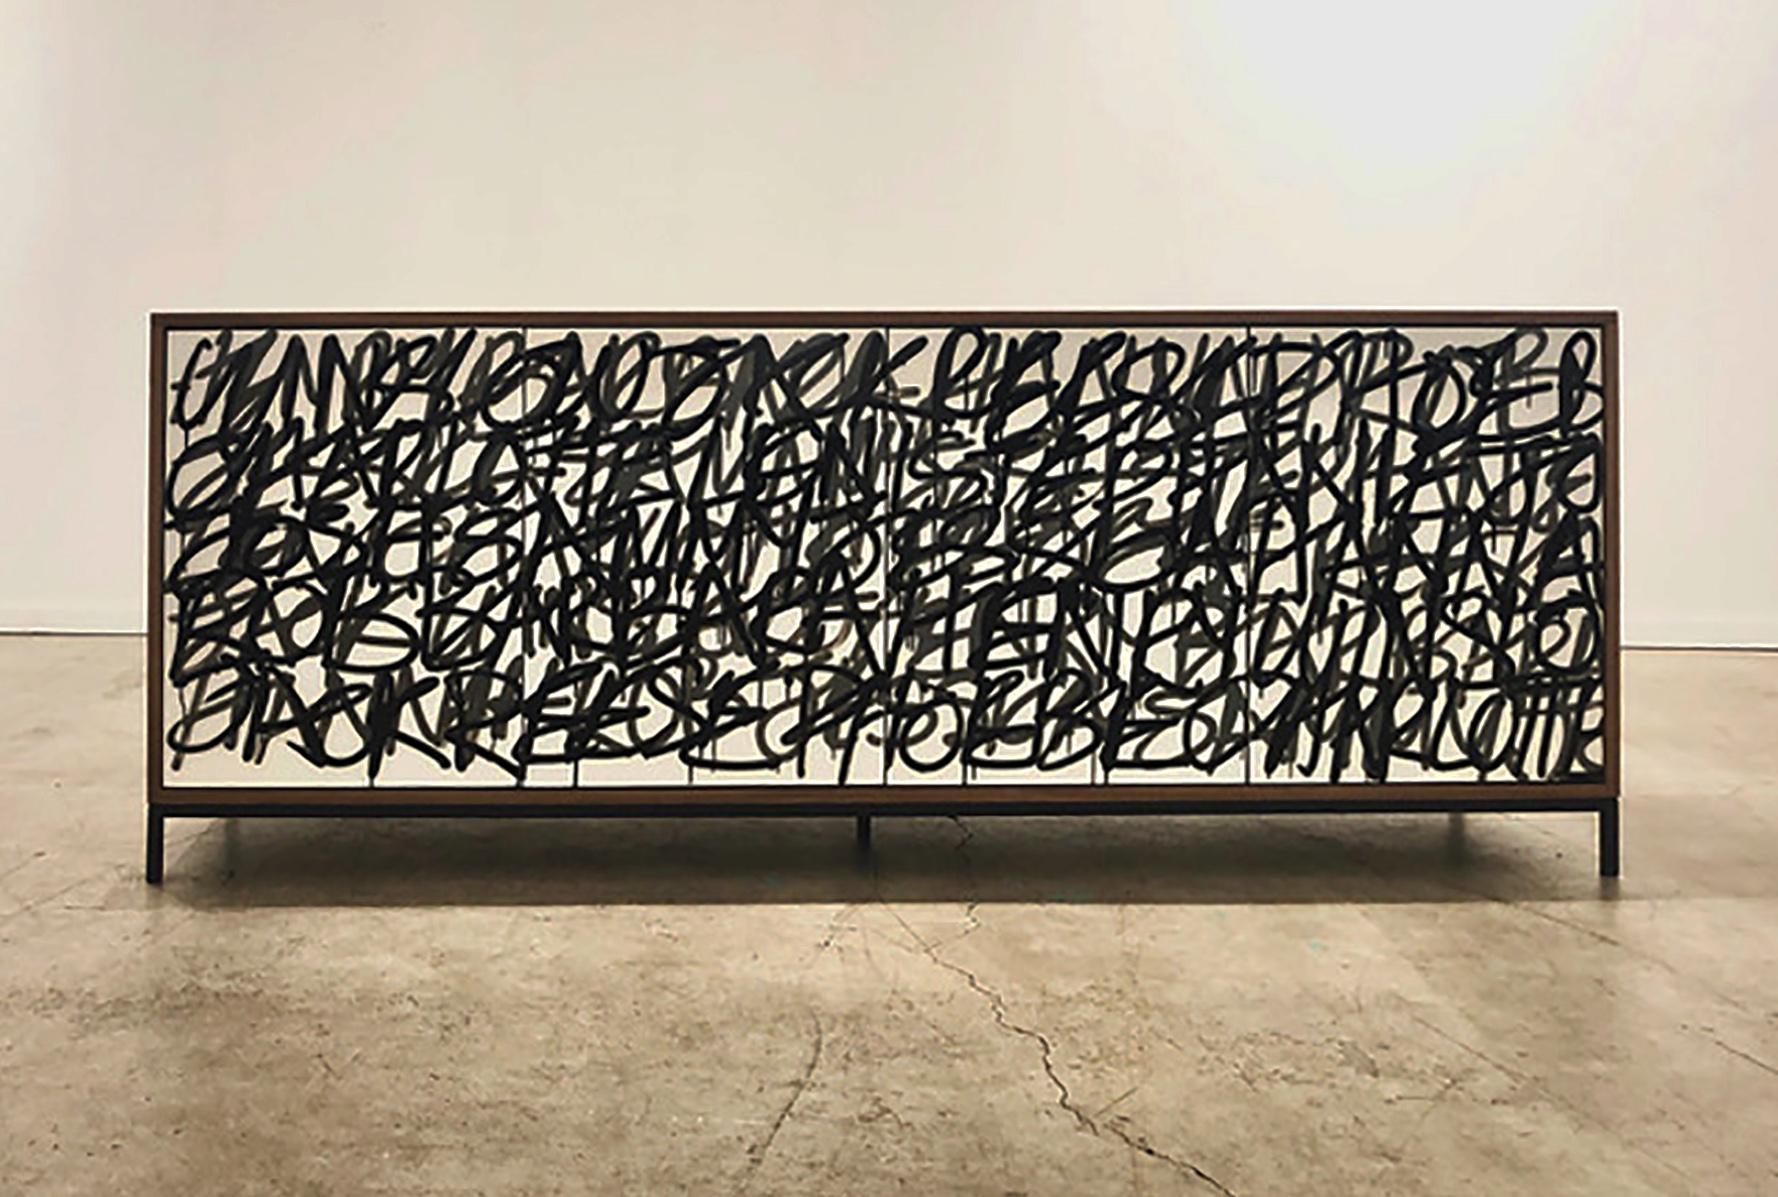 Our 'Say it Again' credenza is creating using graphic, calligraphy inspired, graffiti artwork. The cabinet is designed and finish in our Toronto studio, Morgan Clayhall. The artist is Murray Duncan.

The client can supply